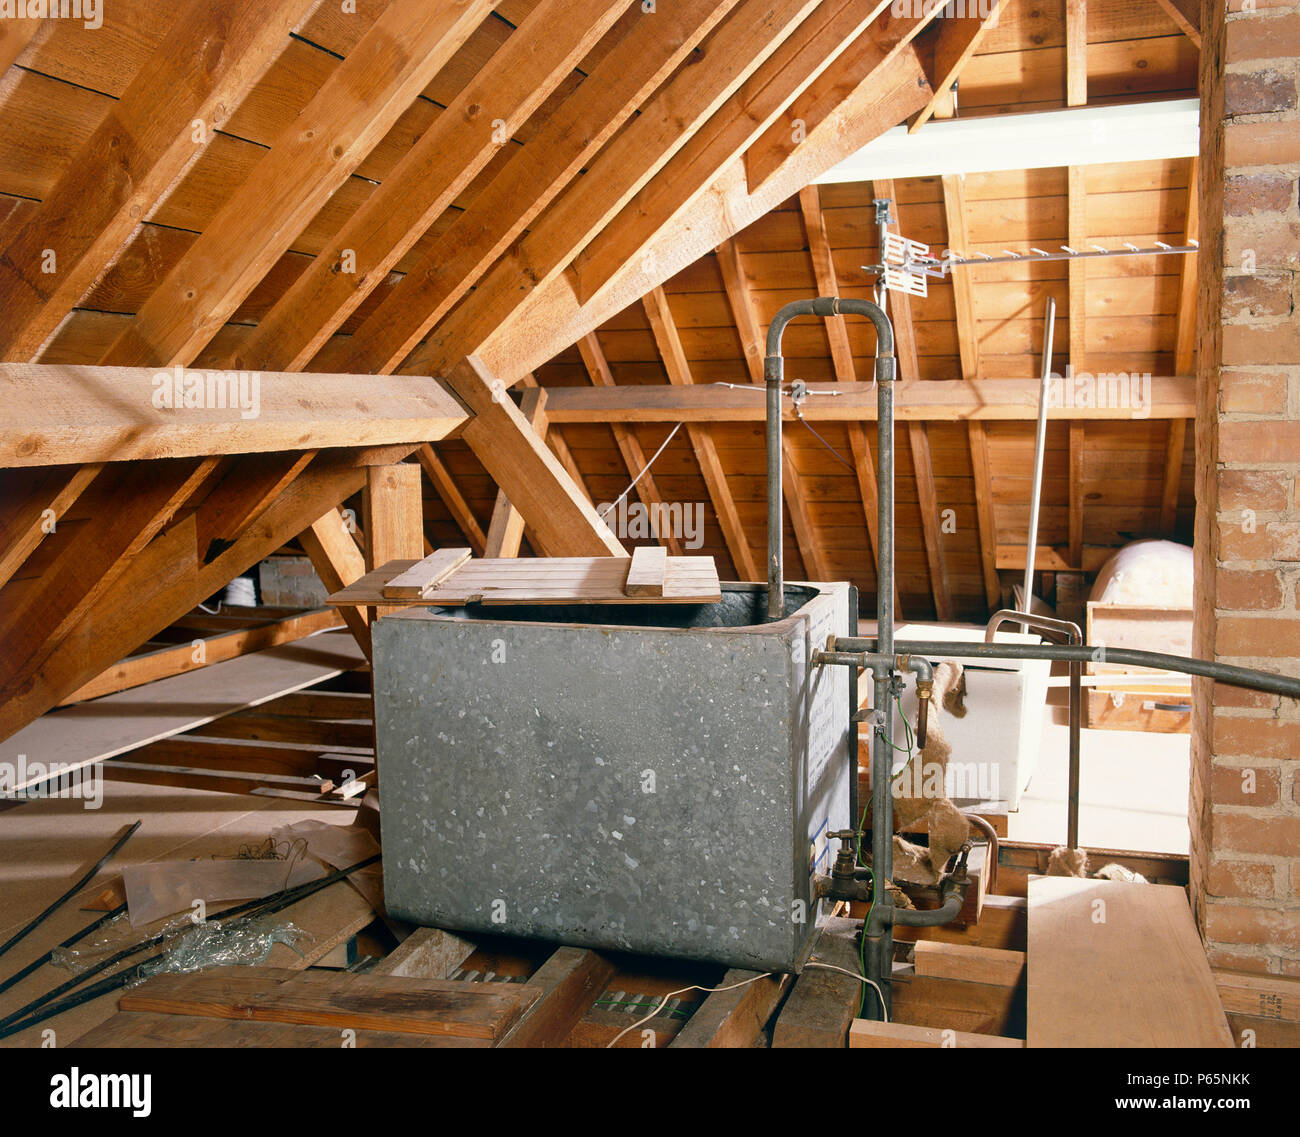 Can a Tankless Water Heater Survive in an Attic?